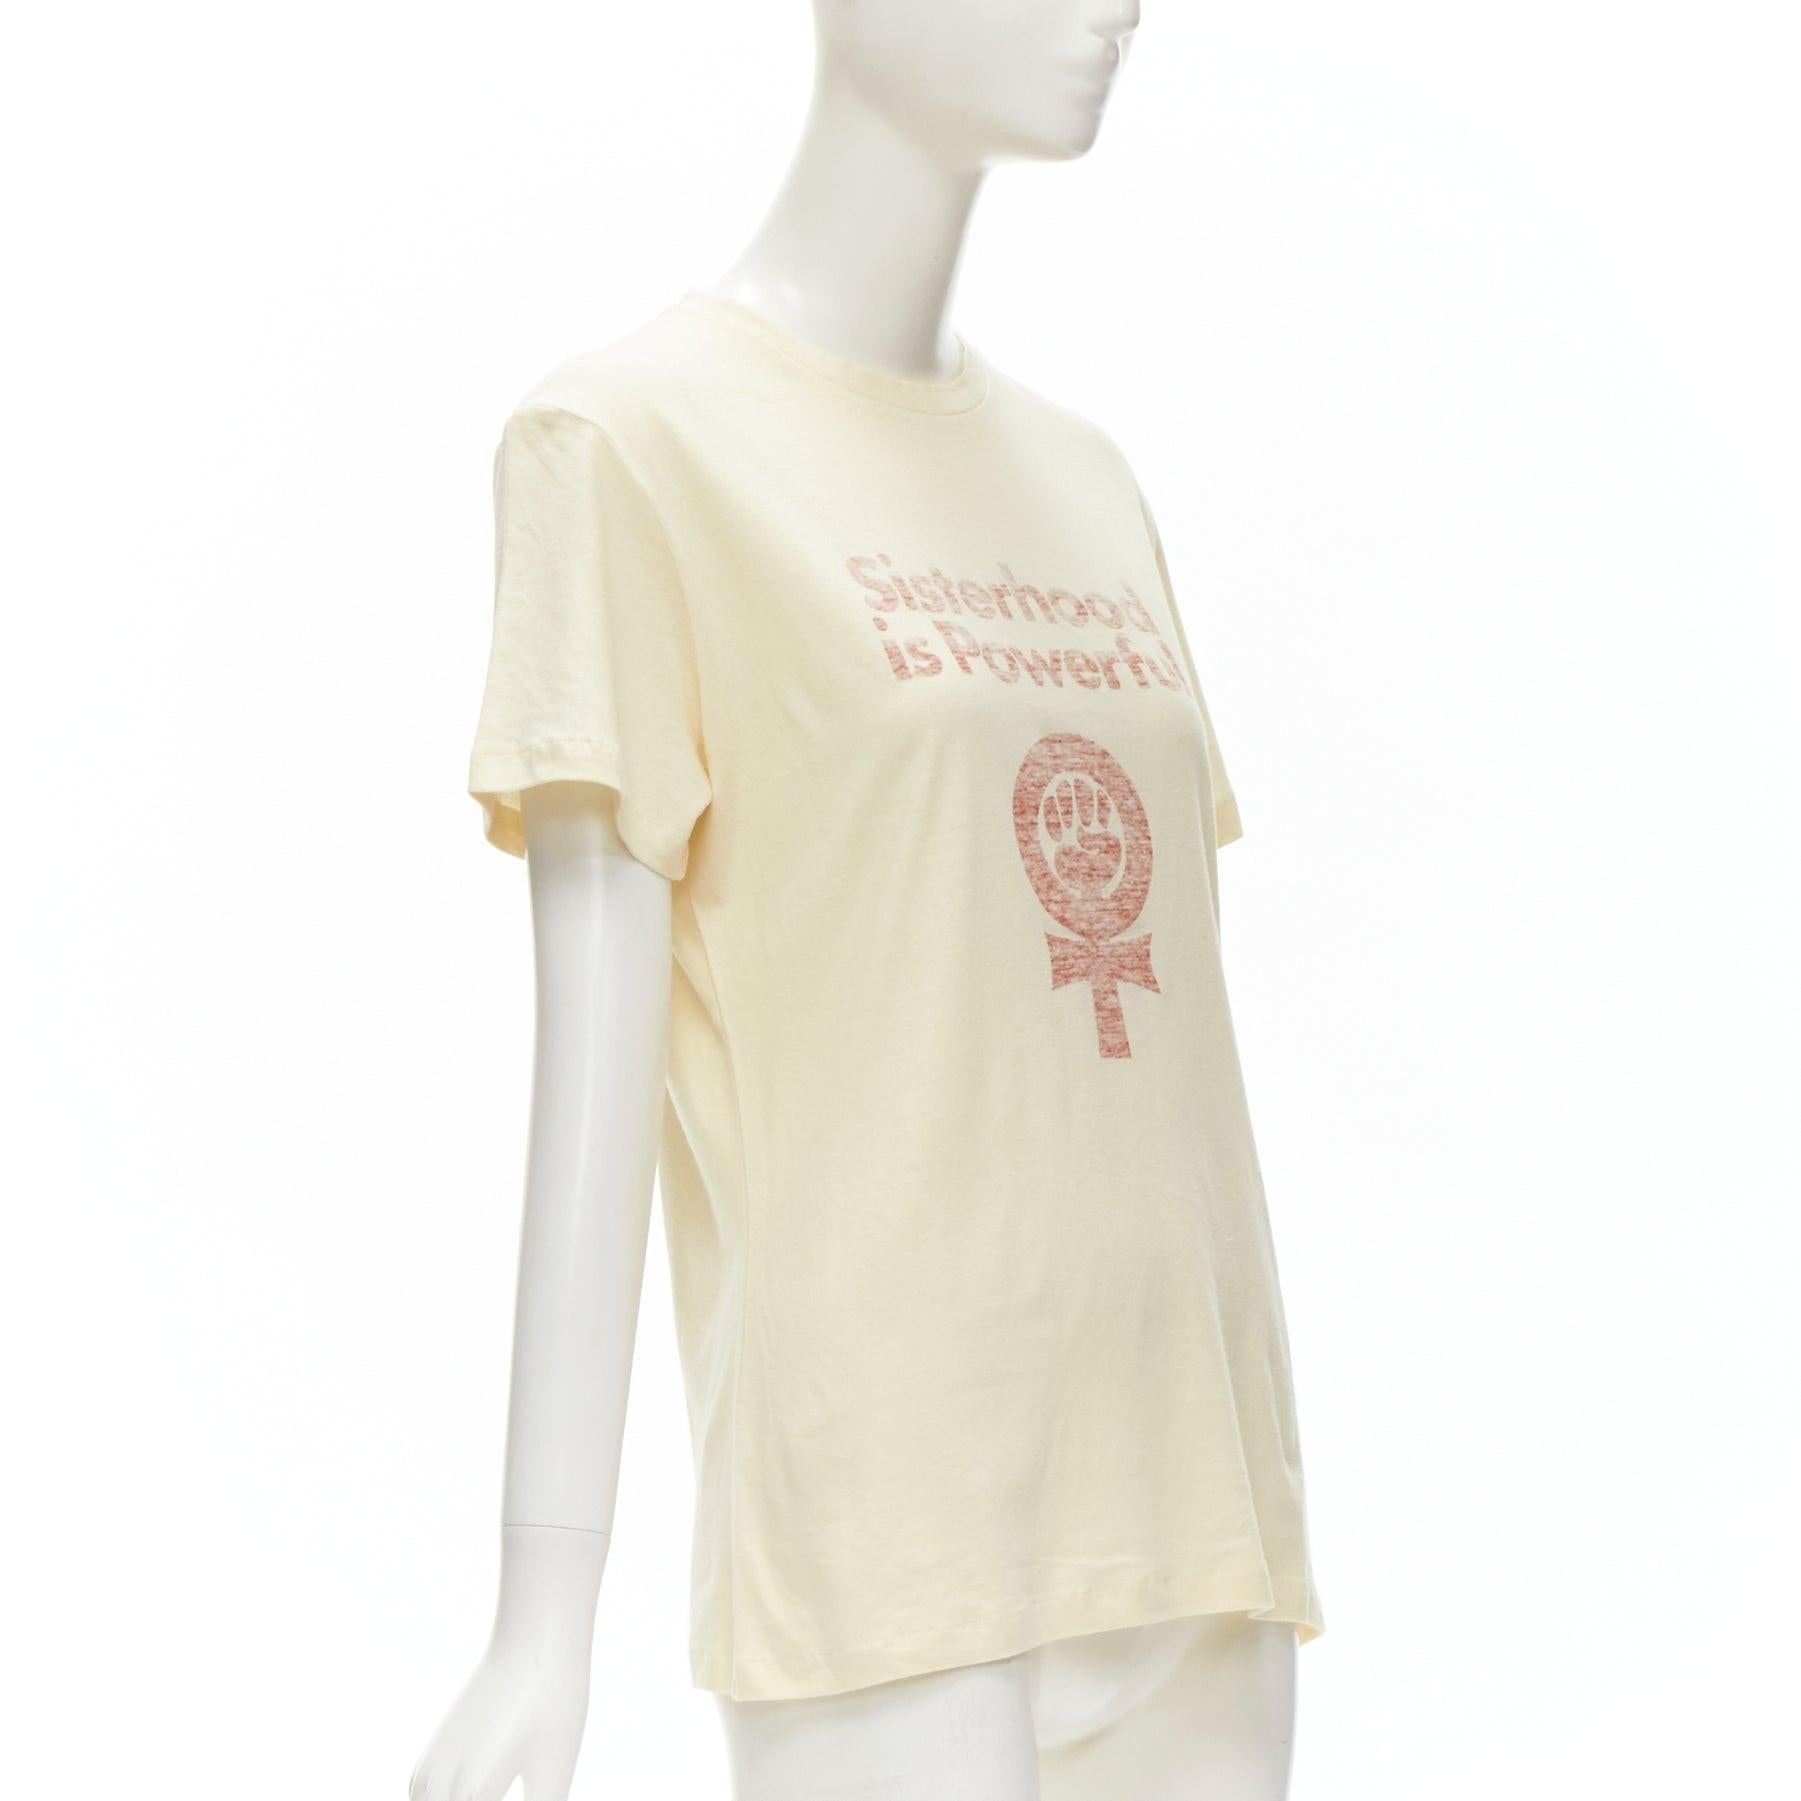 CHRISTIAN DIOR Sisterhood is Powerful Robin Morgan Feminism cotton tshirt S
Reference: KNLM/A00023
Brand: Christian Dior
Designer: Maria Grazia Chiuri
Material: Cotton
Color: Cream, Red
Pattern: Solid
Extra Details: Printed inside out.
Made in: